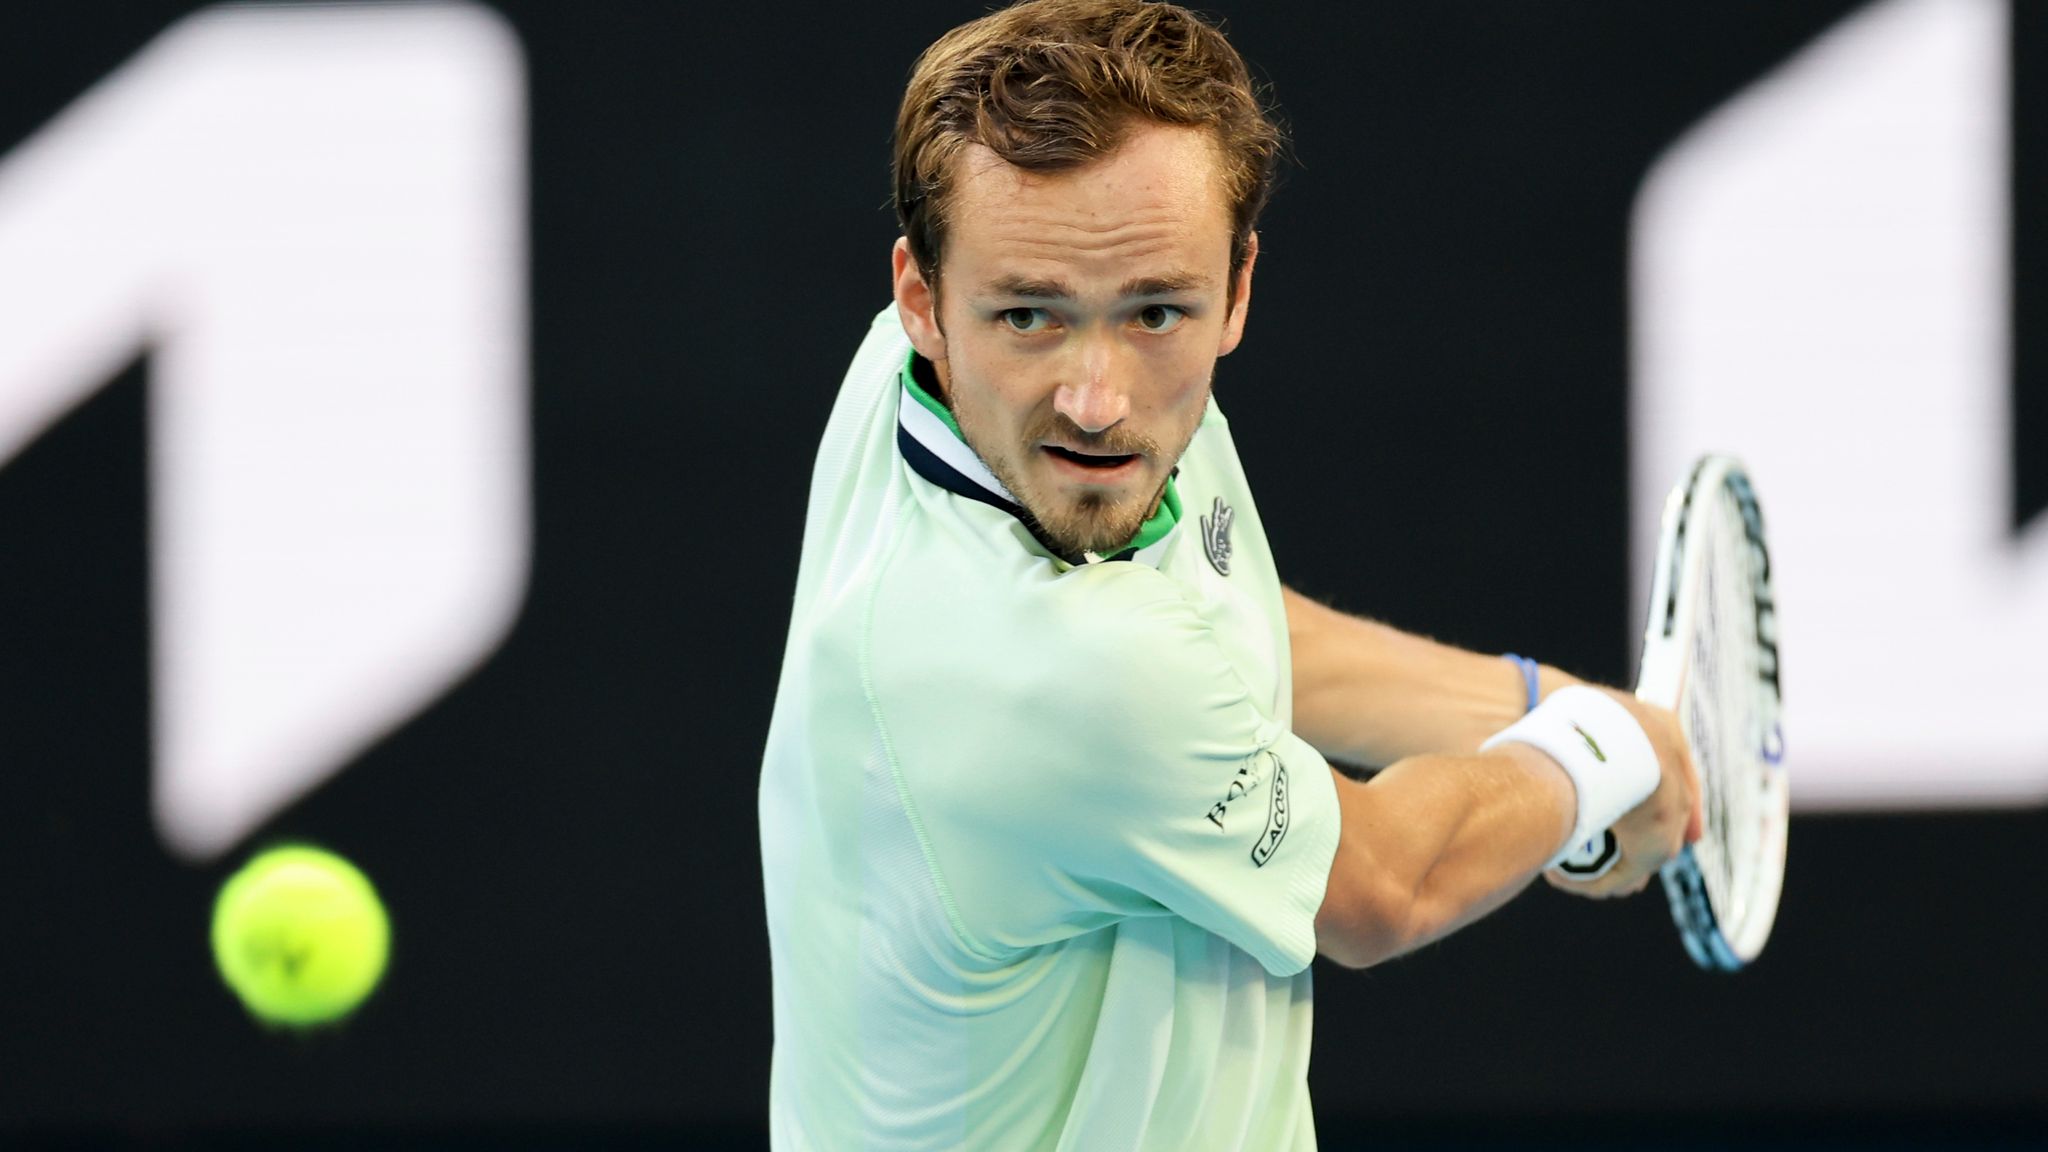 Daniil Medvedev reacts to his defeat at Acapulco